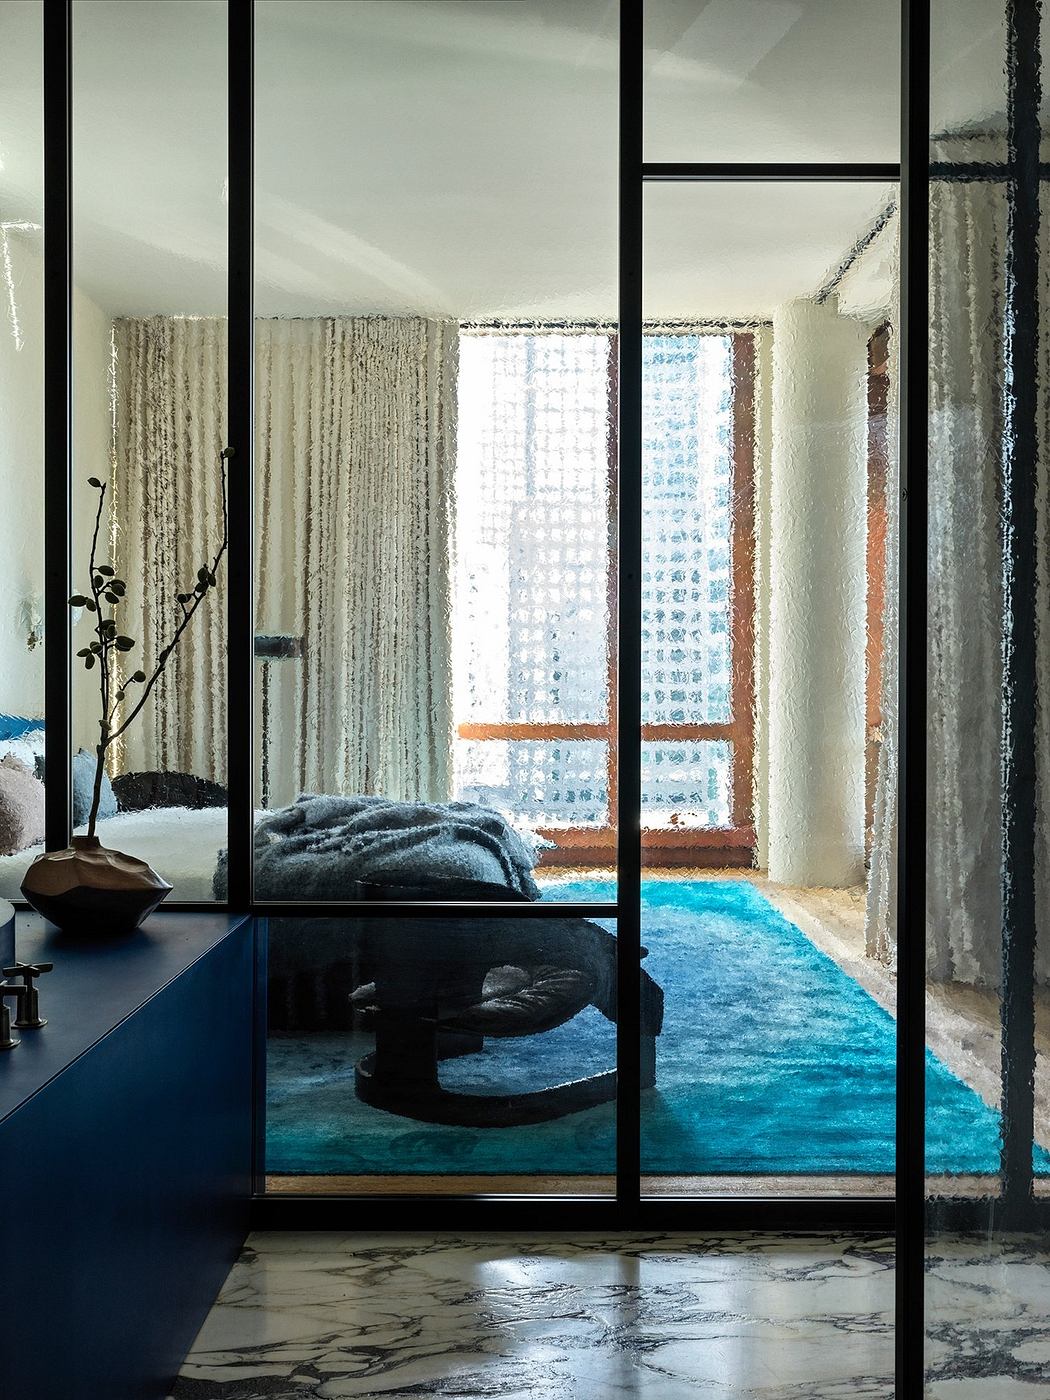 Chic bedroom with glass partition, marble floor, and vibrant blue rug